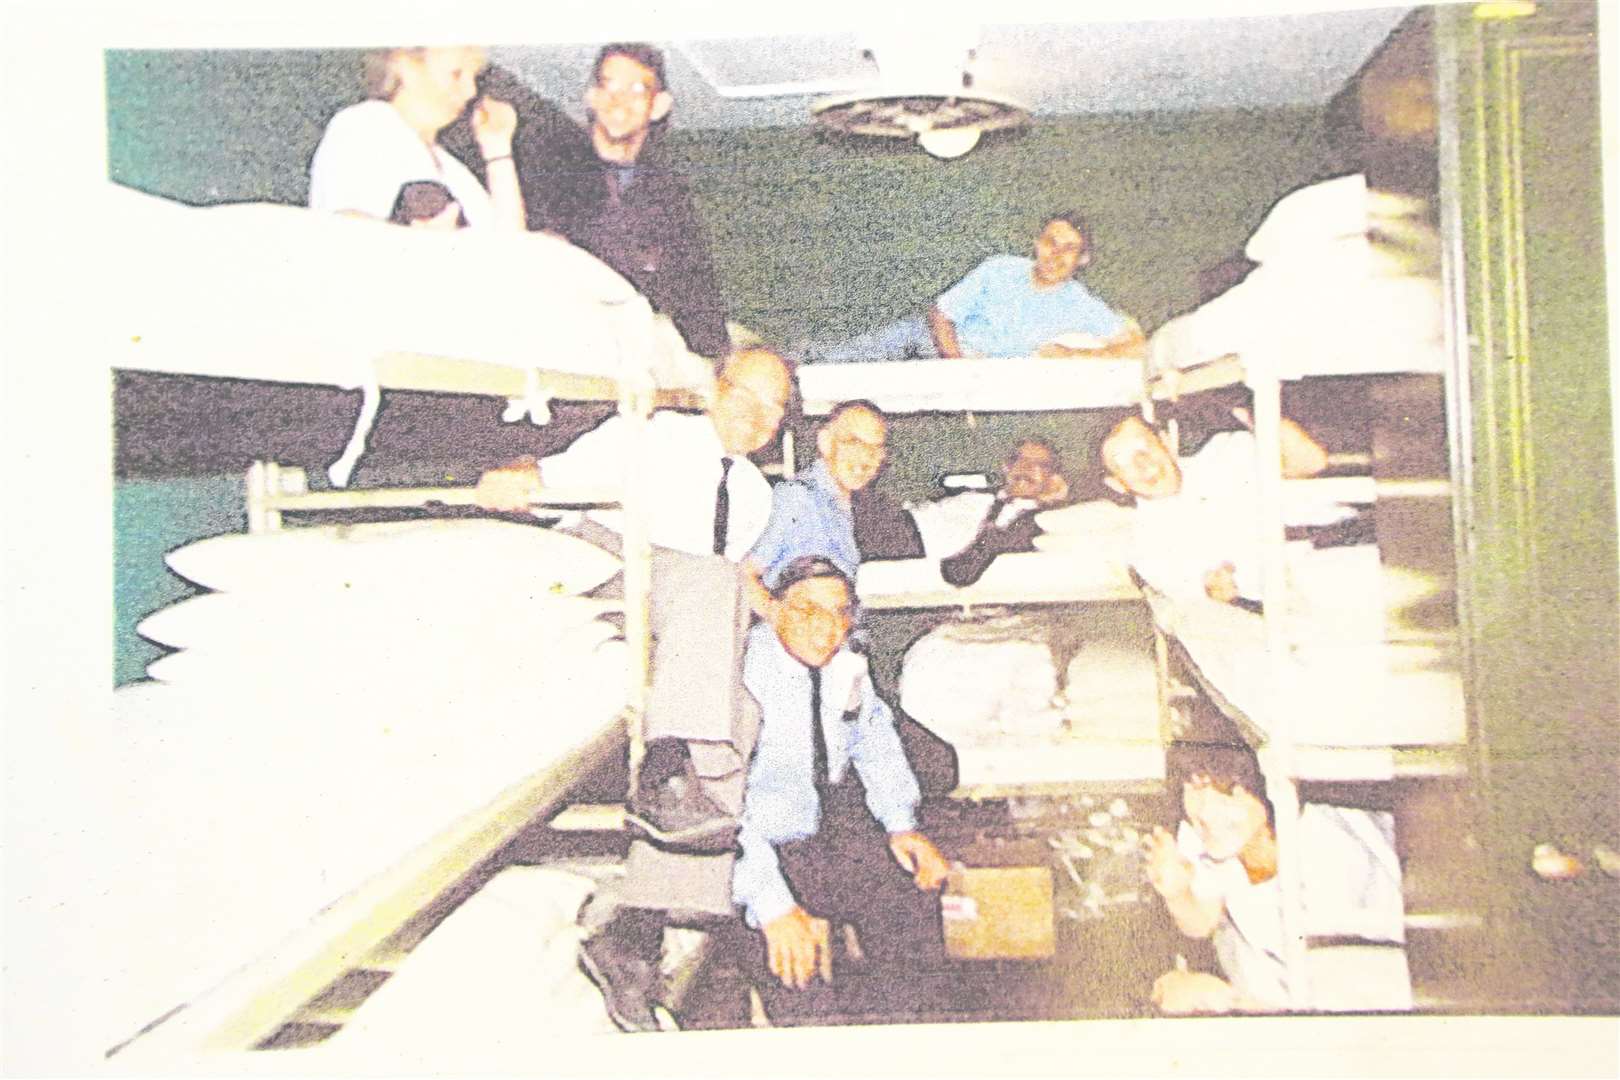 Life in the bunkers was often cramped and air had to come through a ventilation system